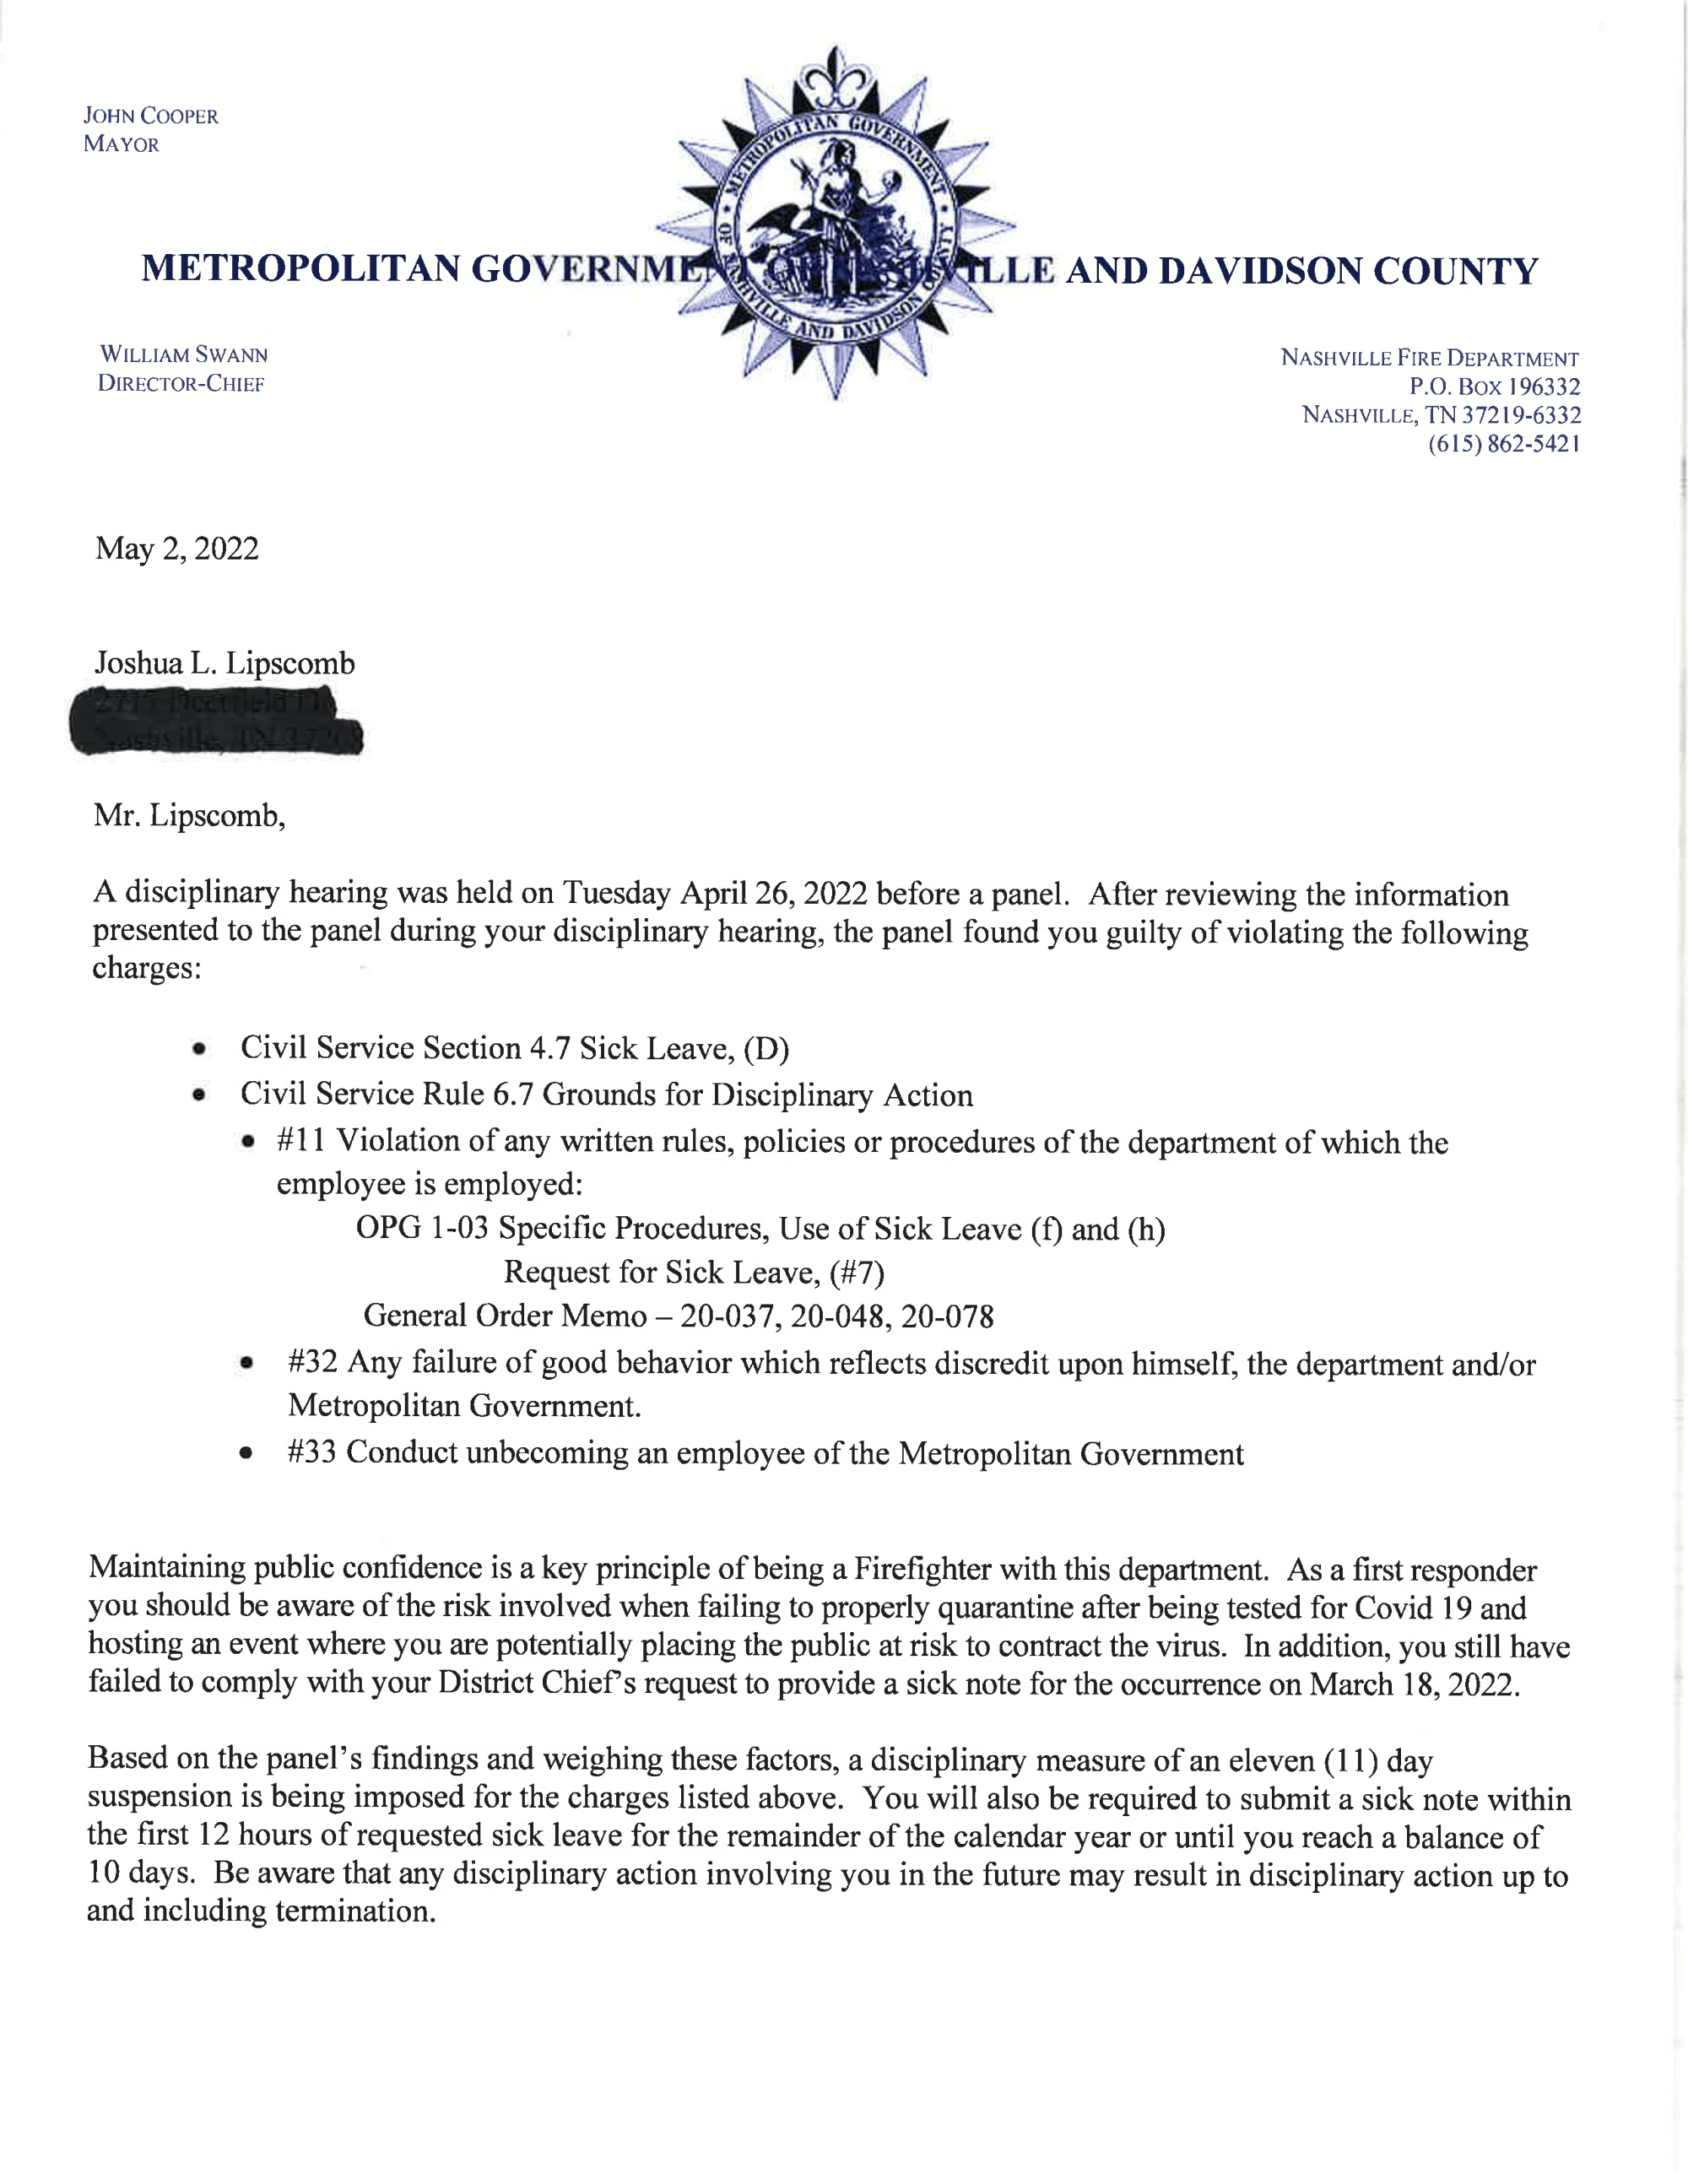 Page 3 of Lipscomb_Charge_Sanction_Letter